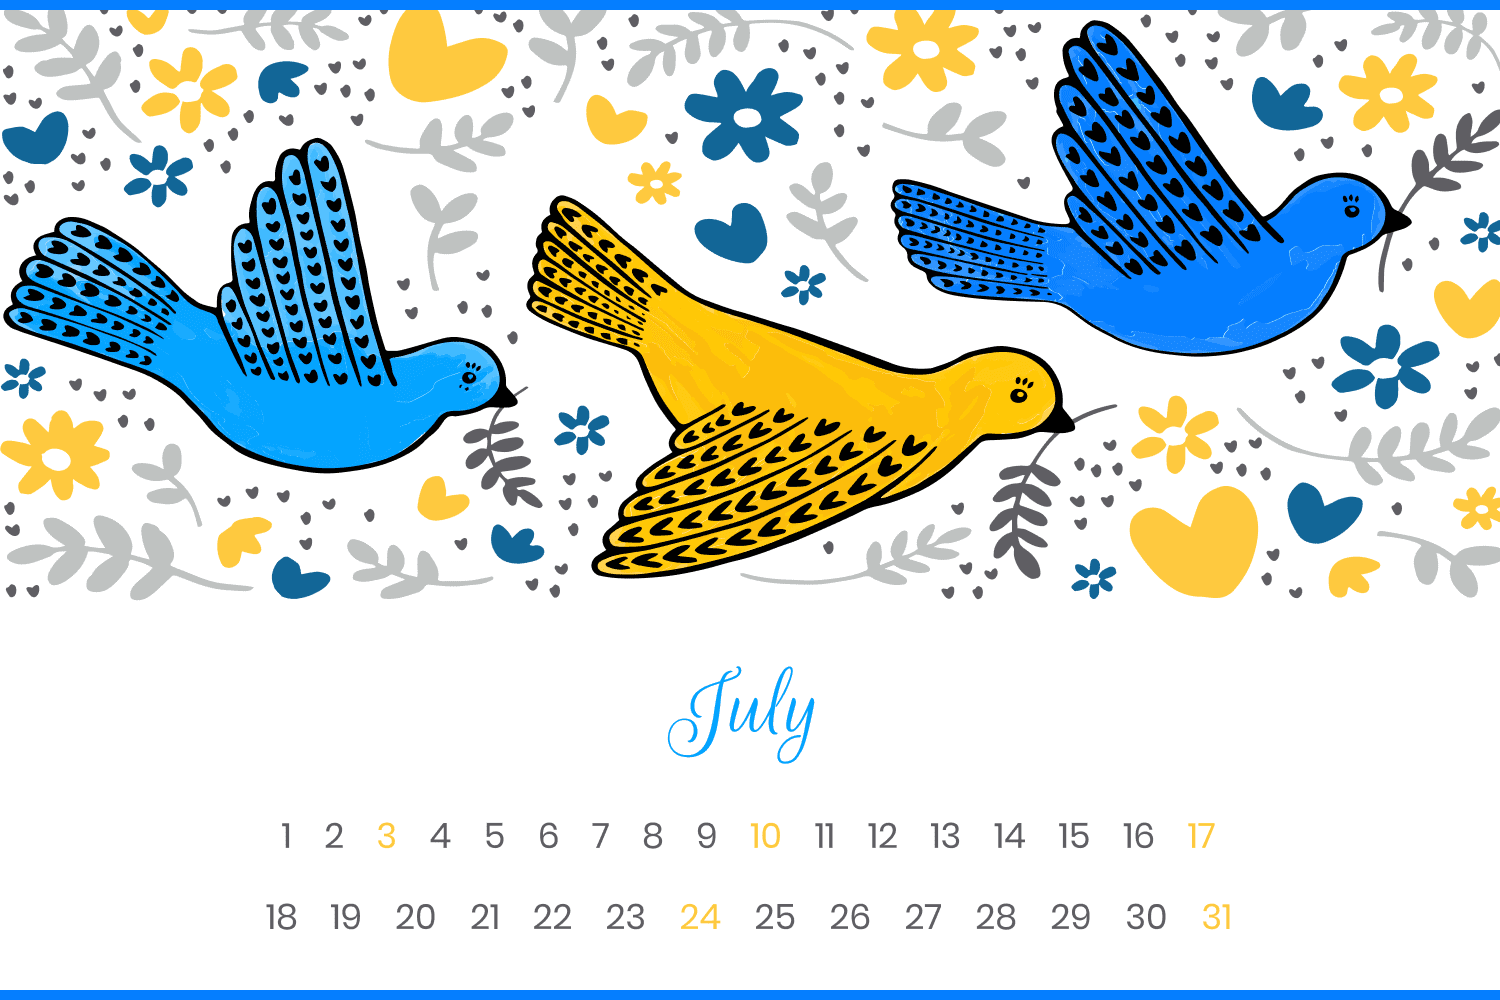 Calendar with painted blue and yellow doves.